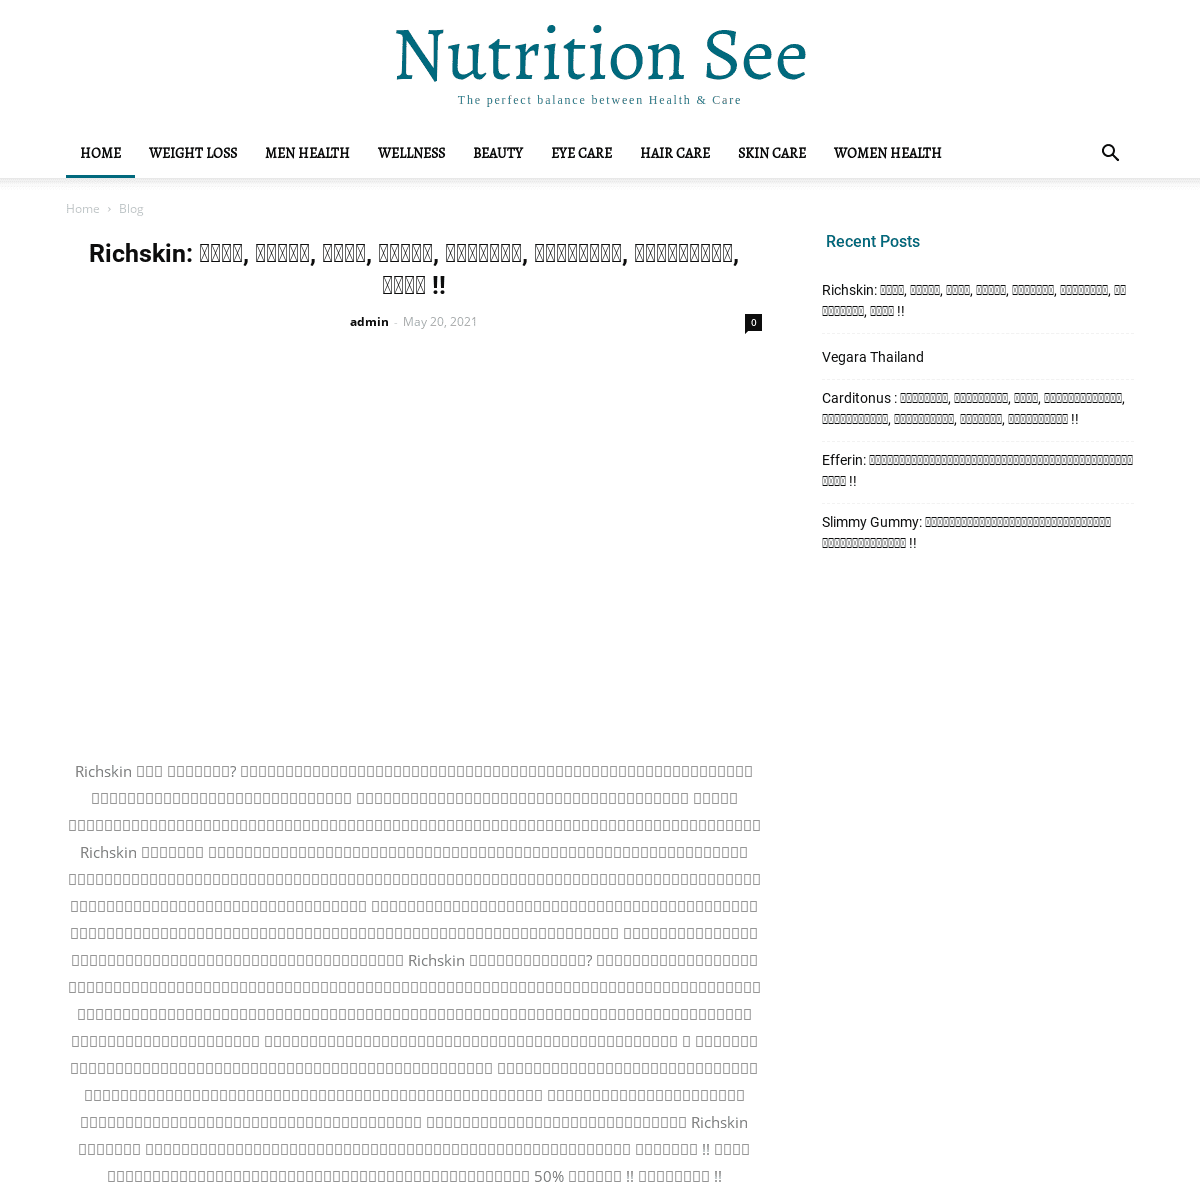 A complete backup of https://nutritionsee.com